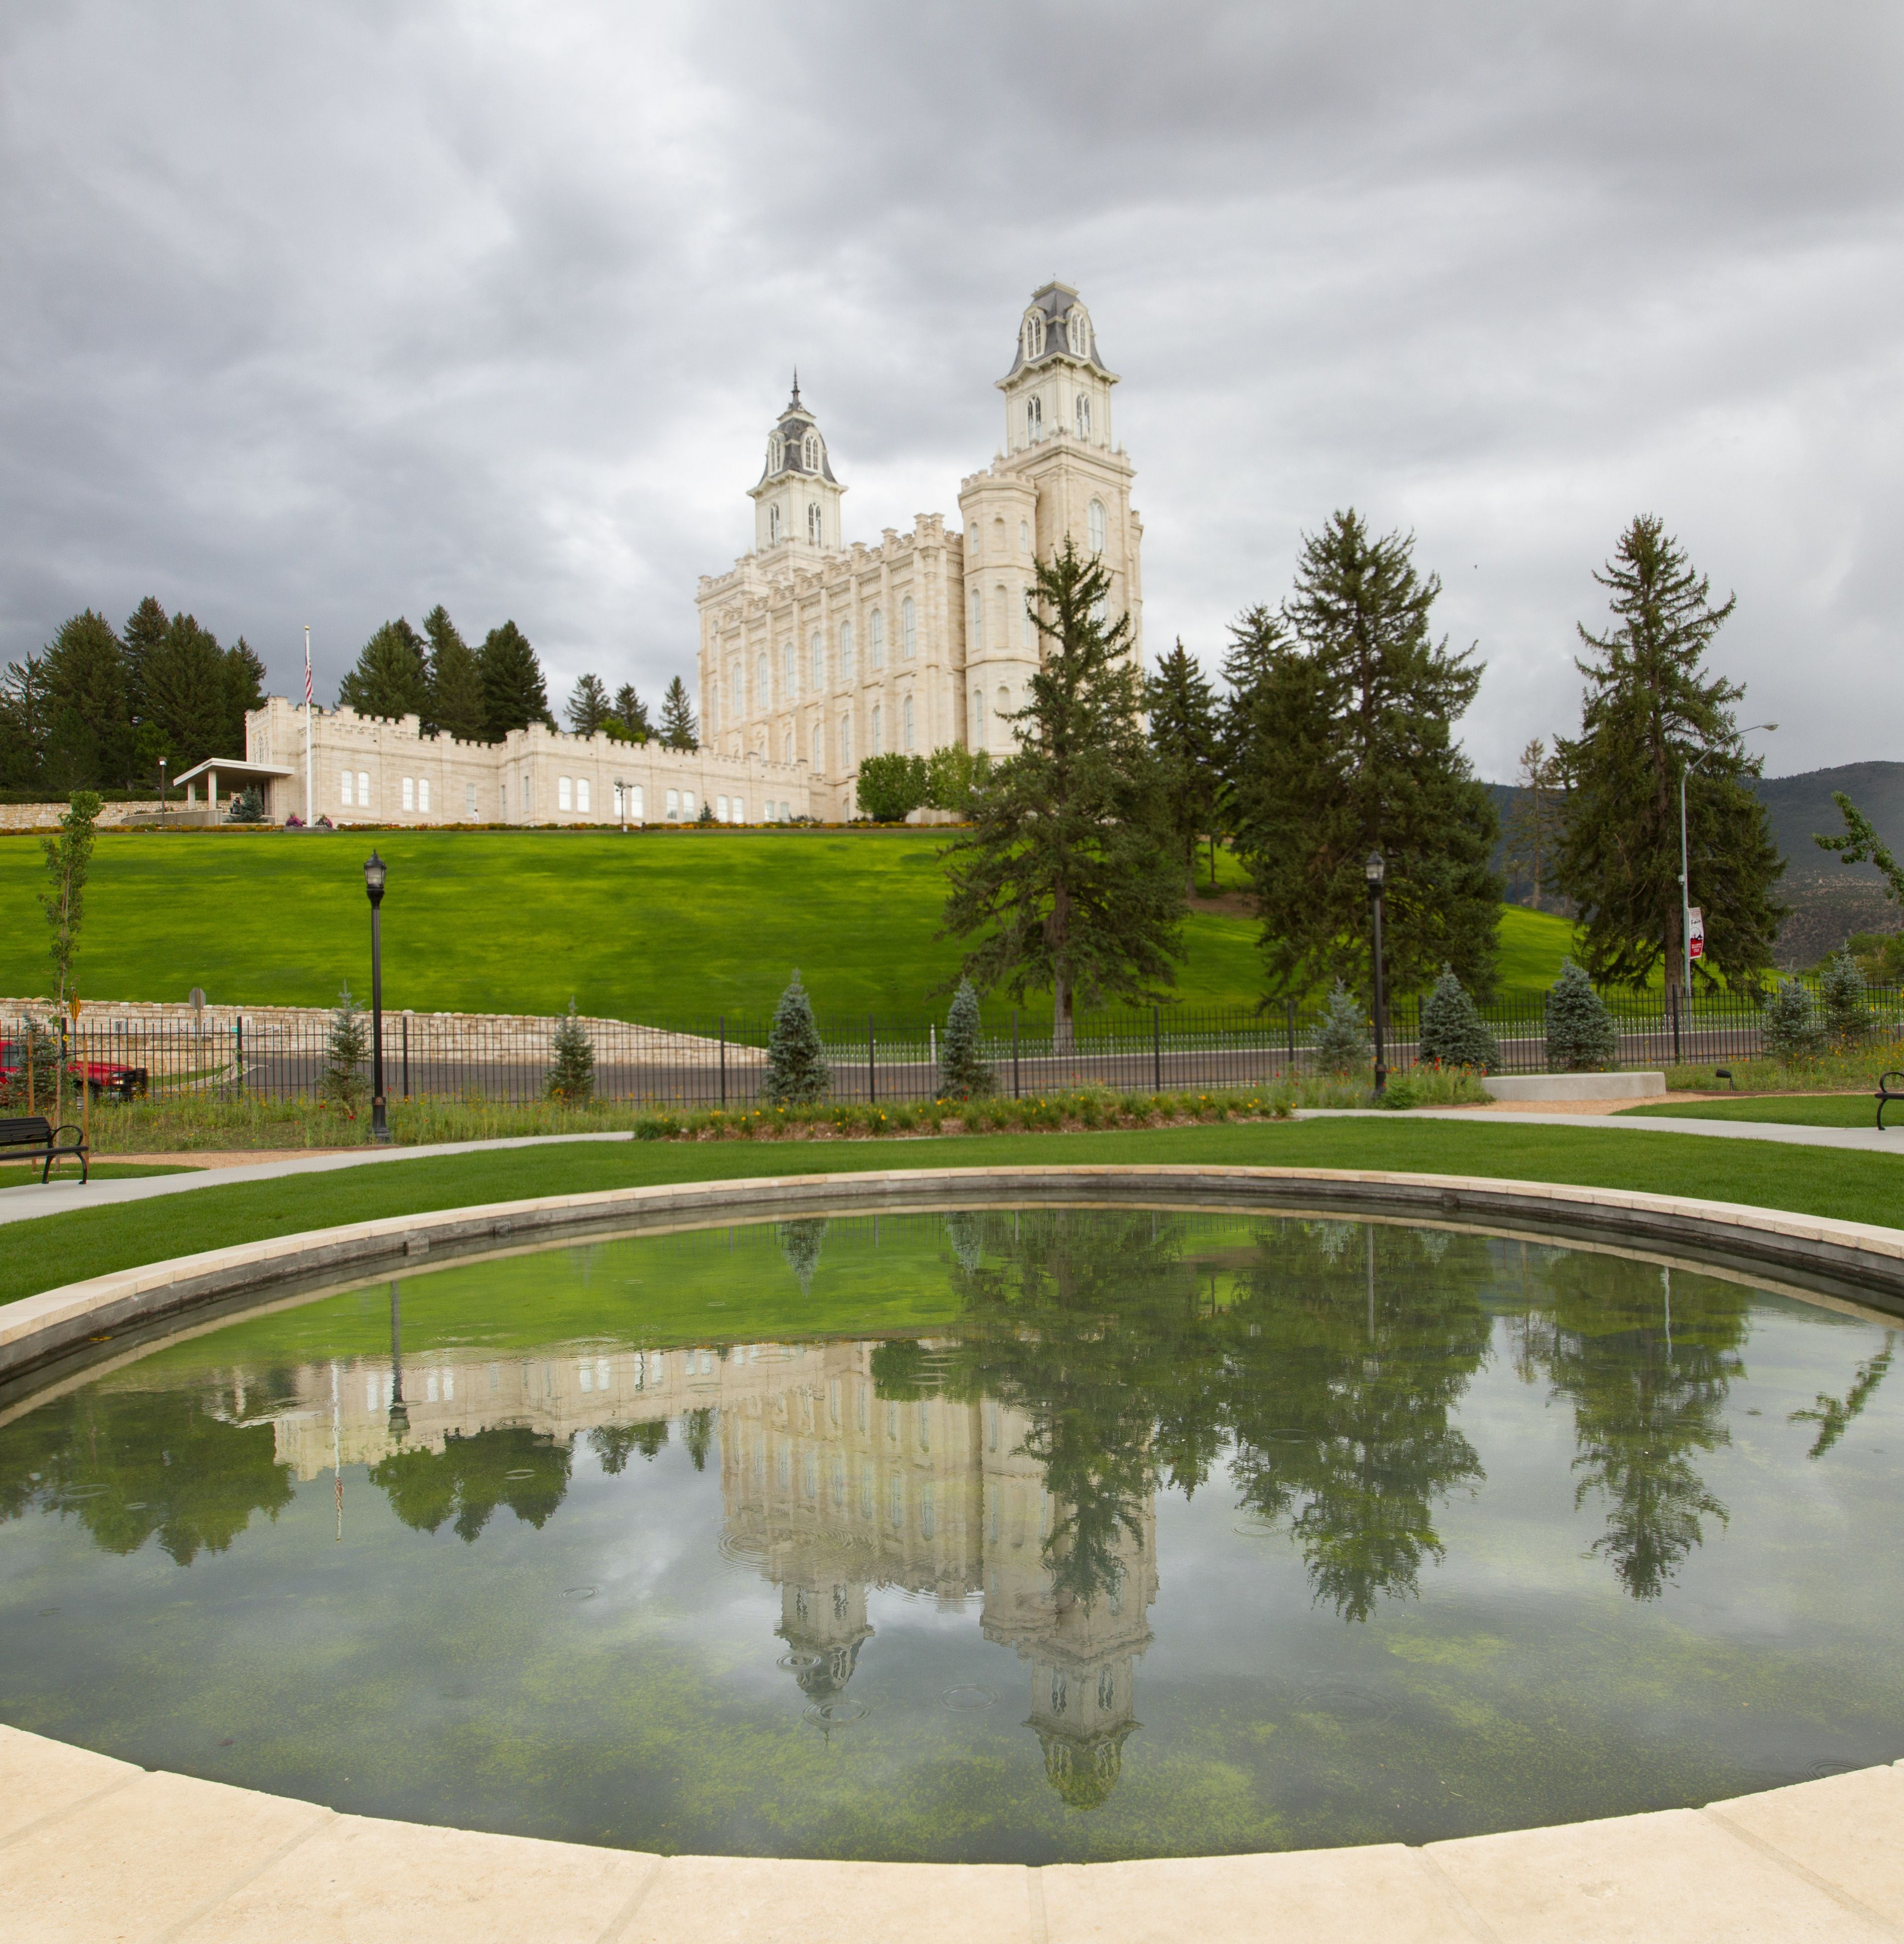 The Manti Utah Temple pond, including the scenery and entrance.